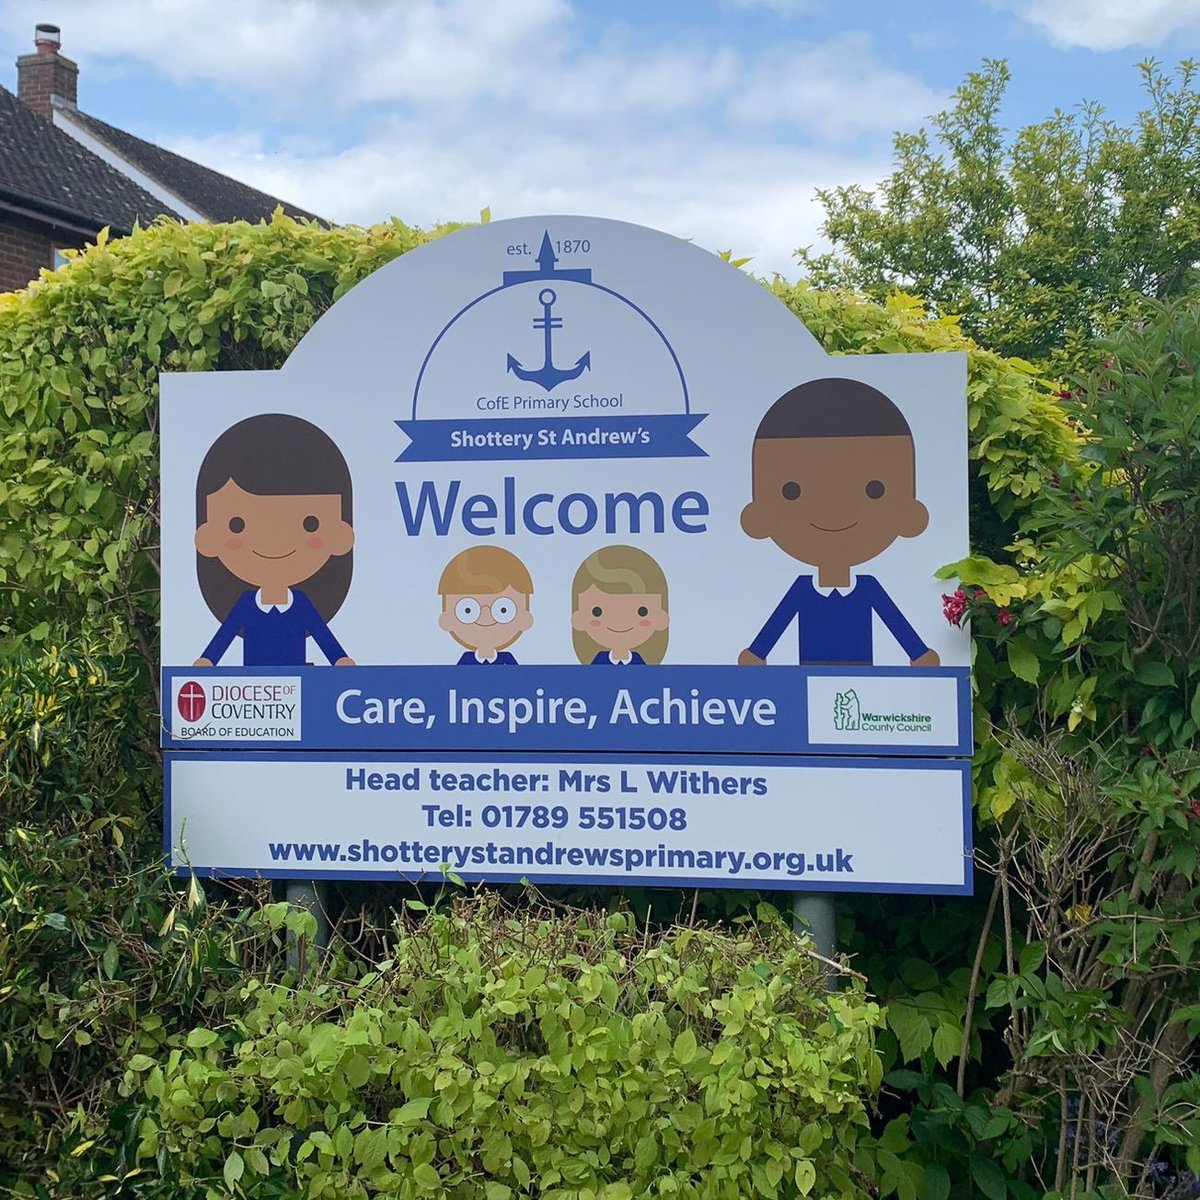 A new welcome sign for @ShotteryPrimary designed, produced and fitted in time for their Open Event today.
#schoolsigns #signs #signage #schools #education #externalsignage #educationalsignage #educationsector #signdesign #signagedesign #shottery #stratforduponavon #warwickshire